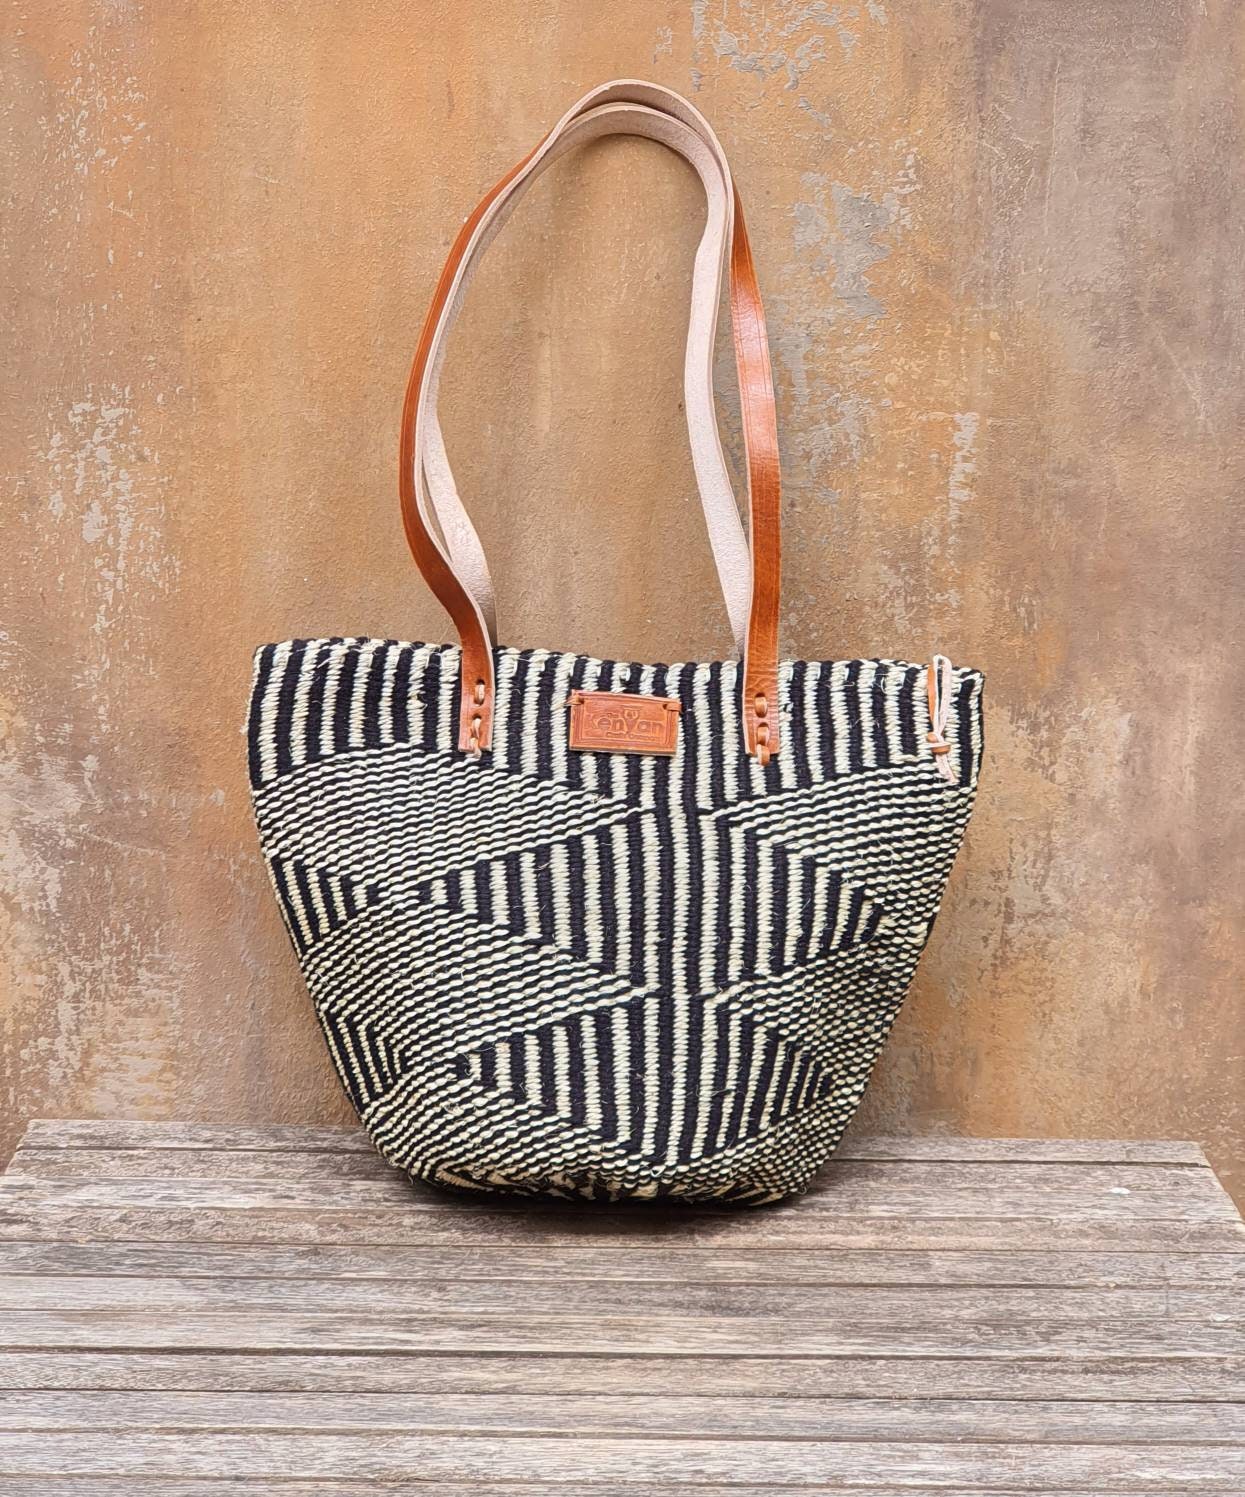 Anthropologie | Bags | Anthropologie 99s Sisal Tote Basket Weave Market Tote  In Tan With Green | Poshmark